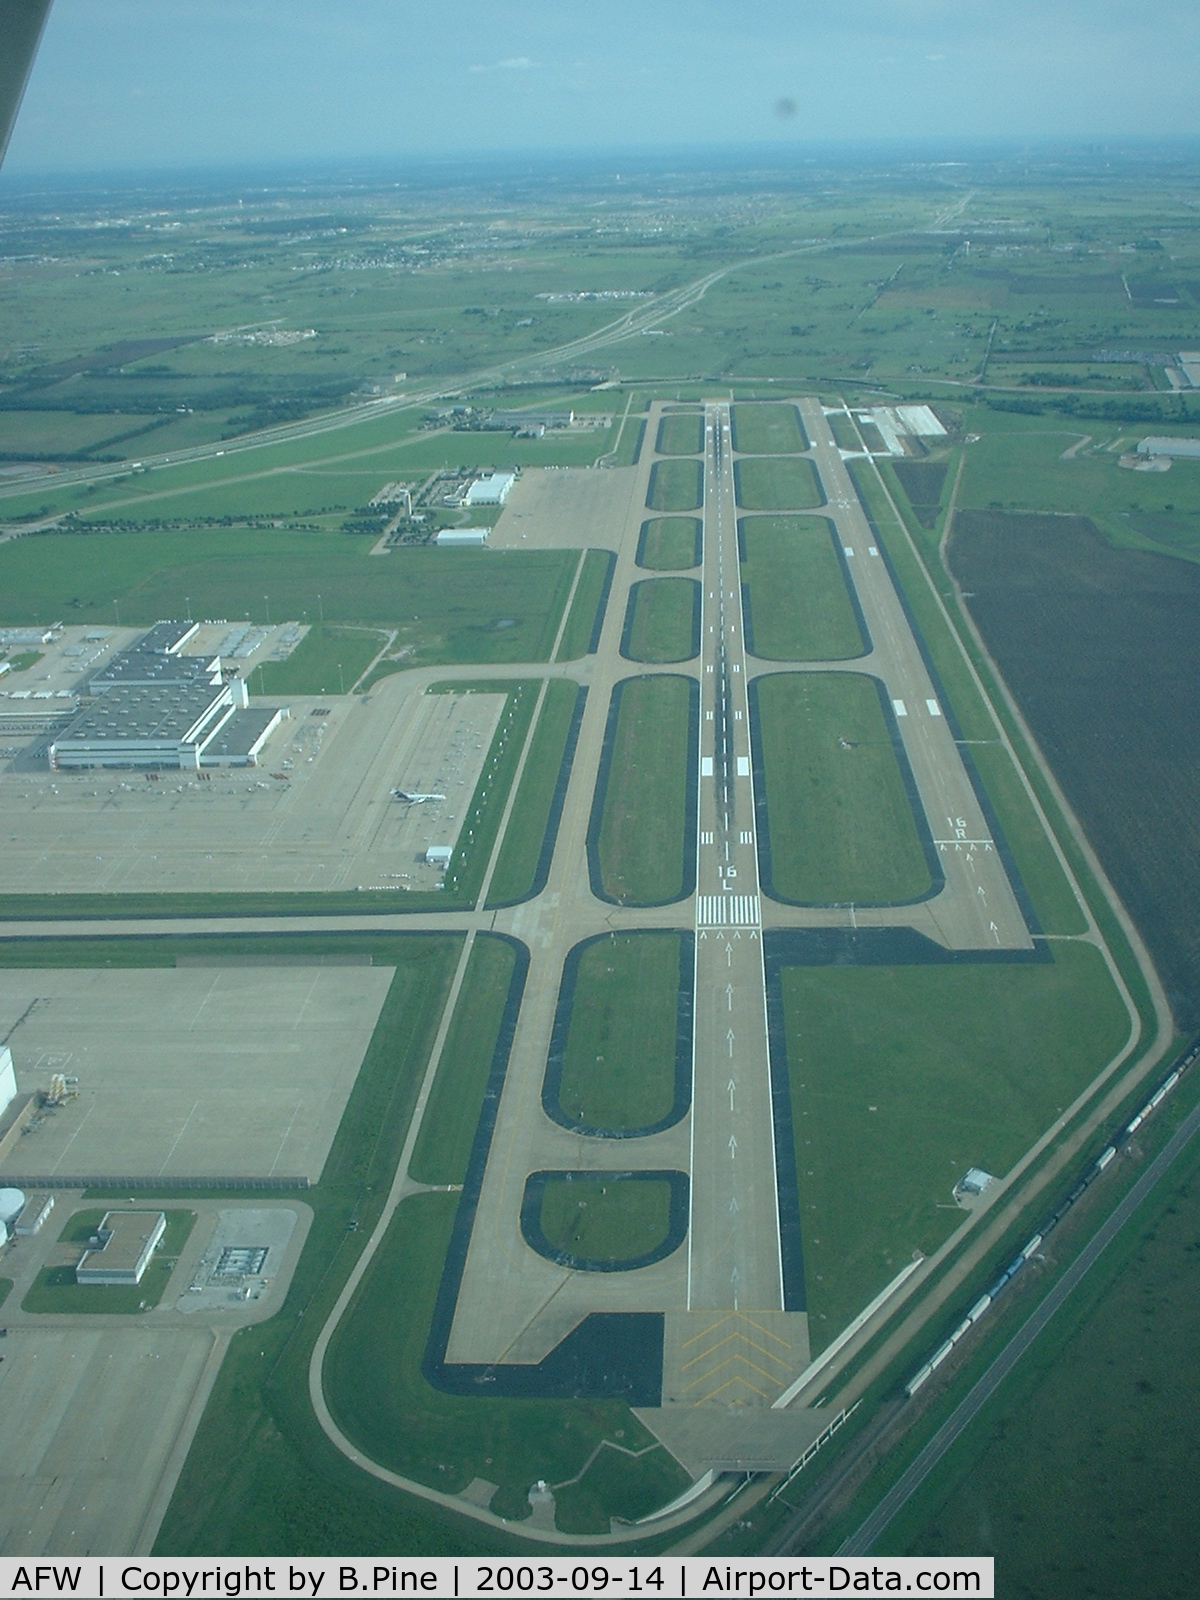 Fort Worth Alliance Airport (AFW) - Great shot of the two runways at AFW